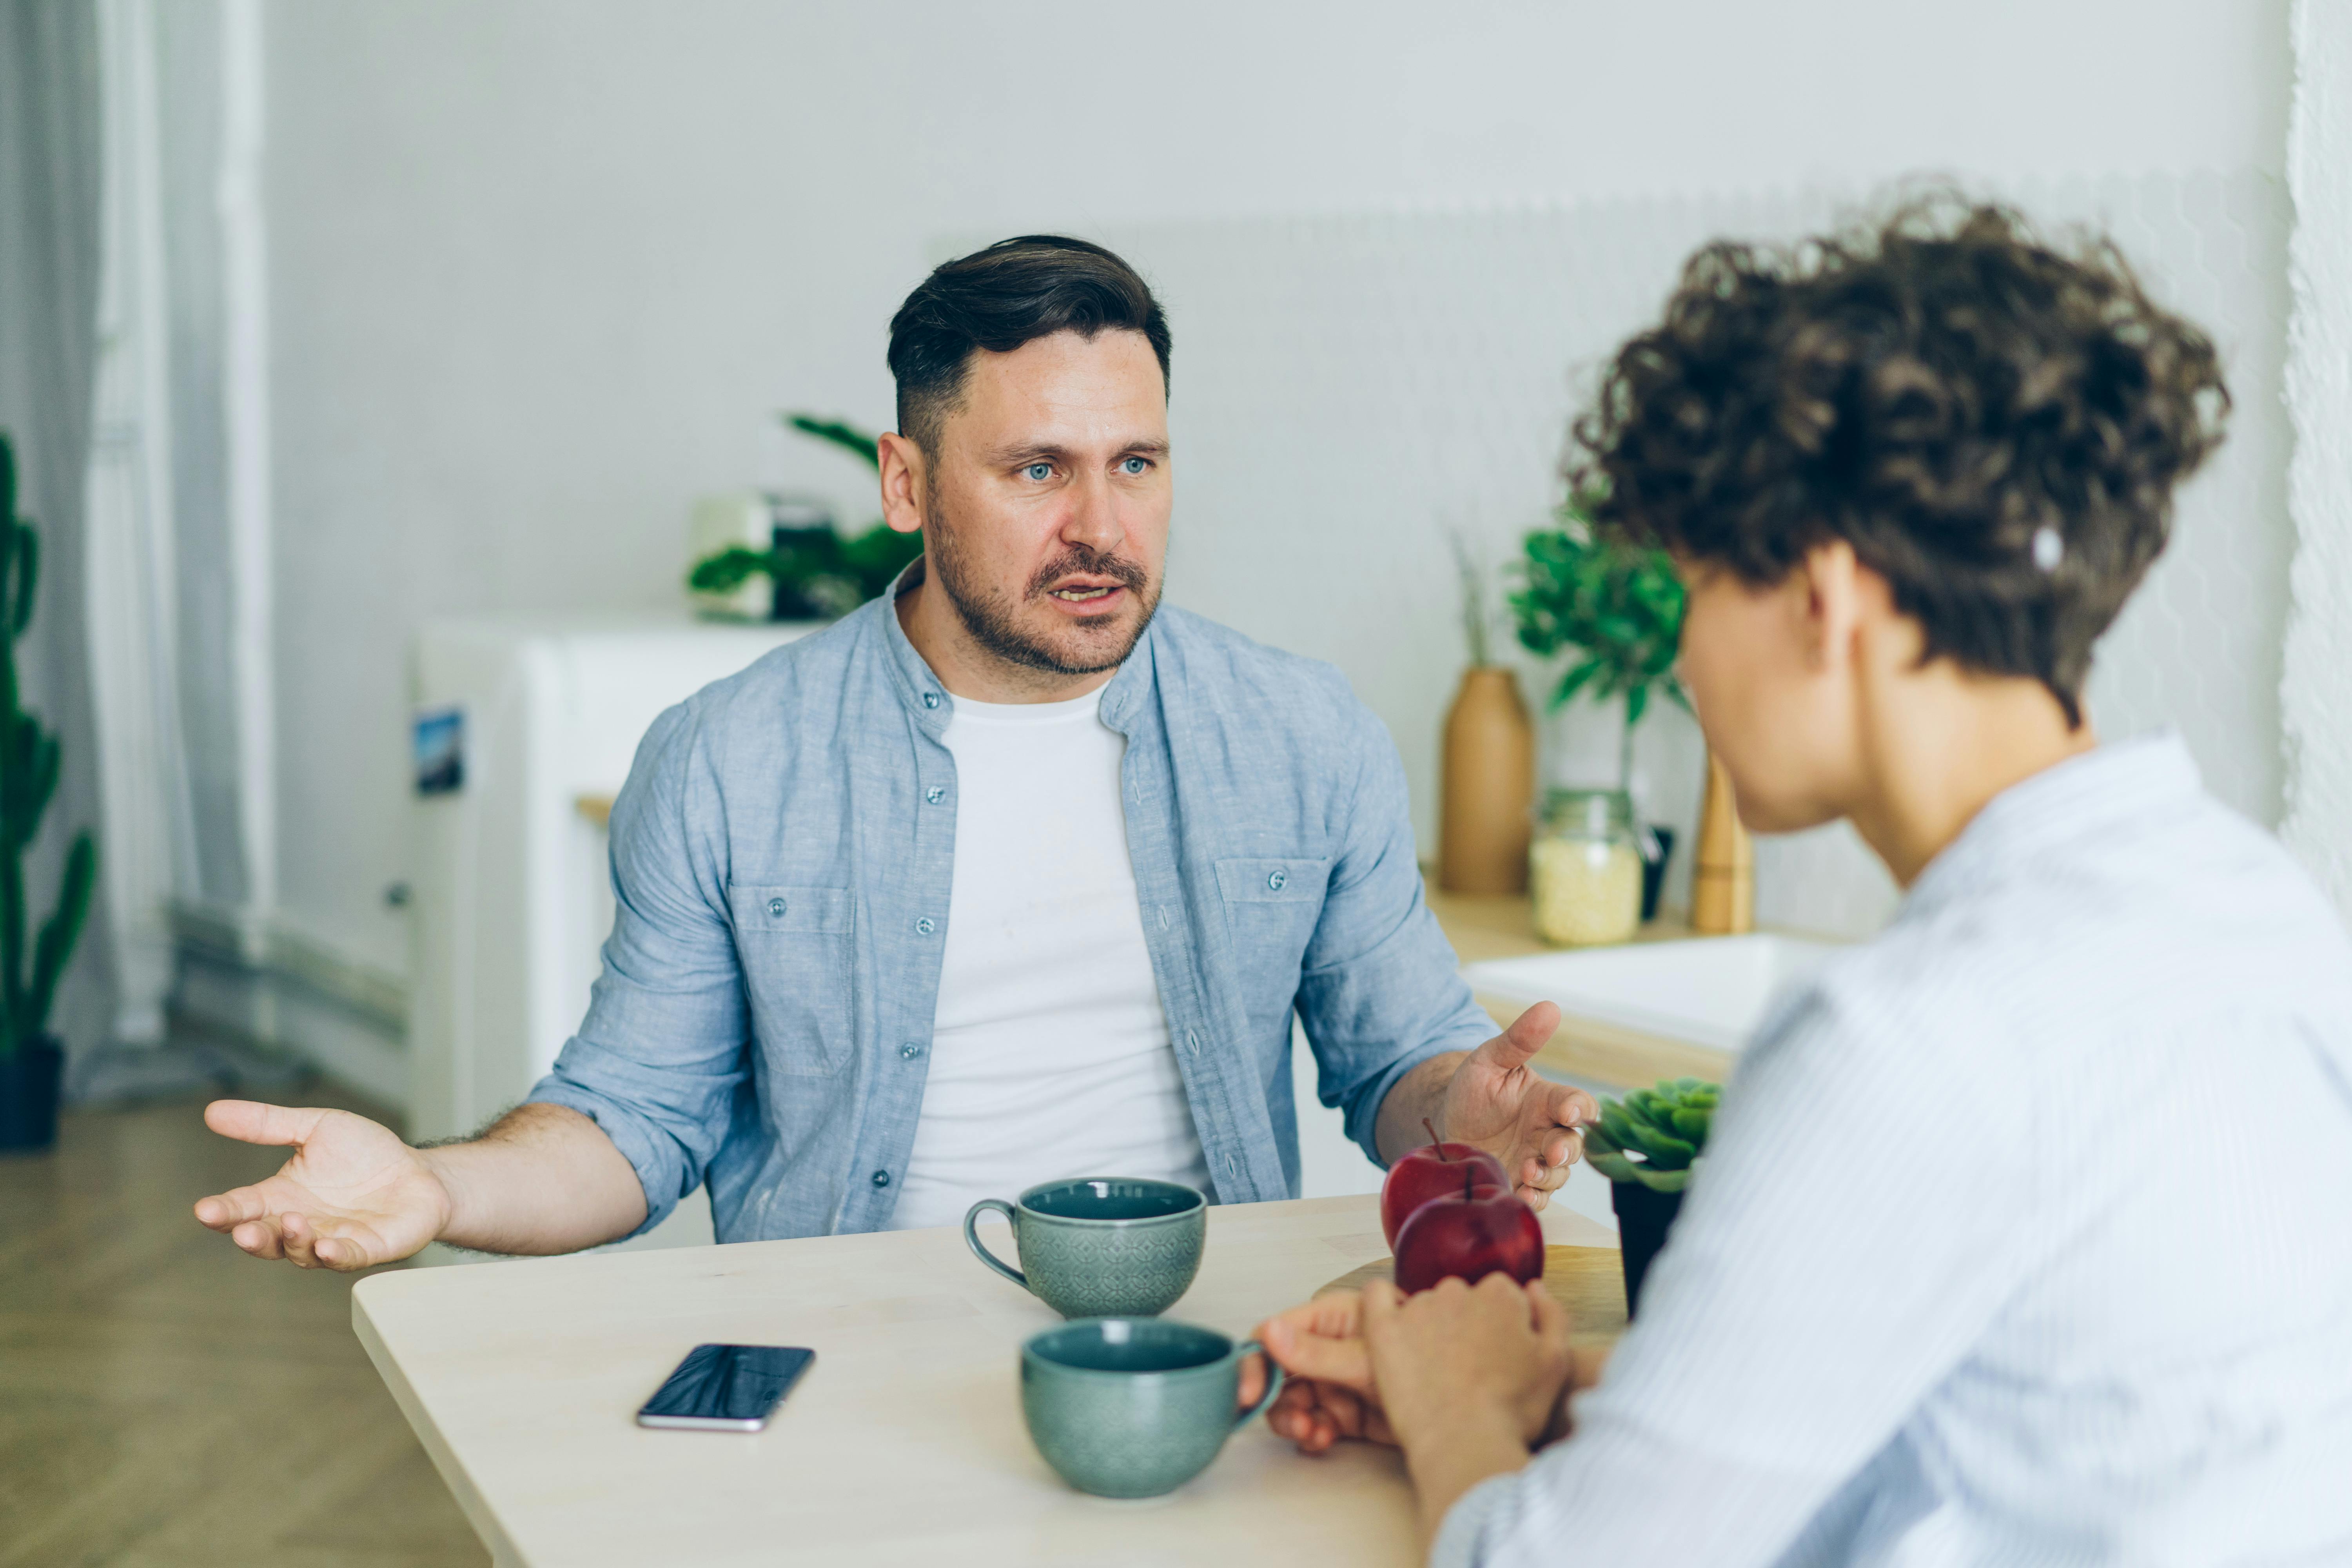 A man reacting upset about something while talking to woman | Source: Pexels